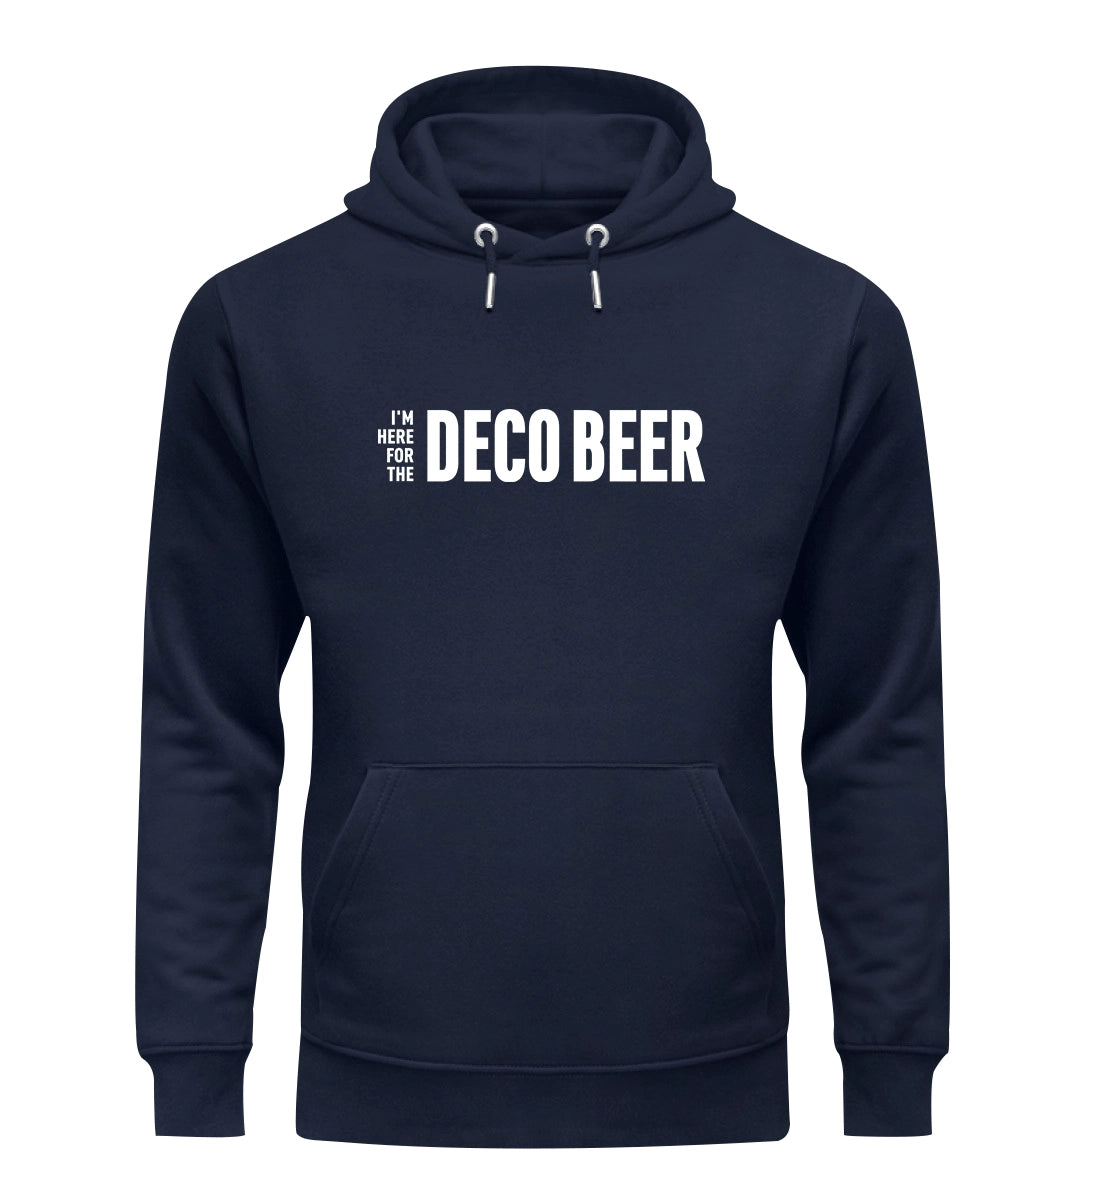 I'm here for the Deco Beer - Bio Hoodie